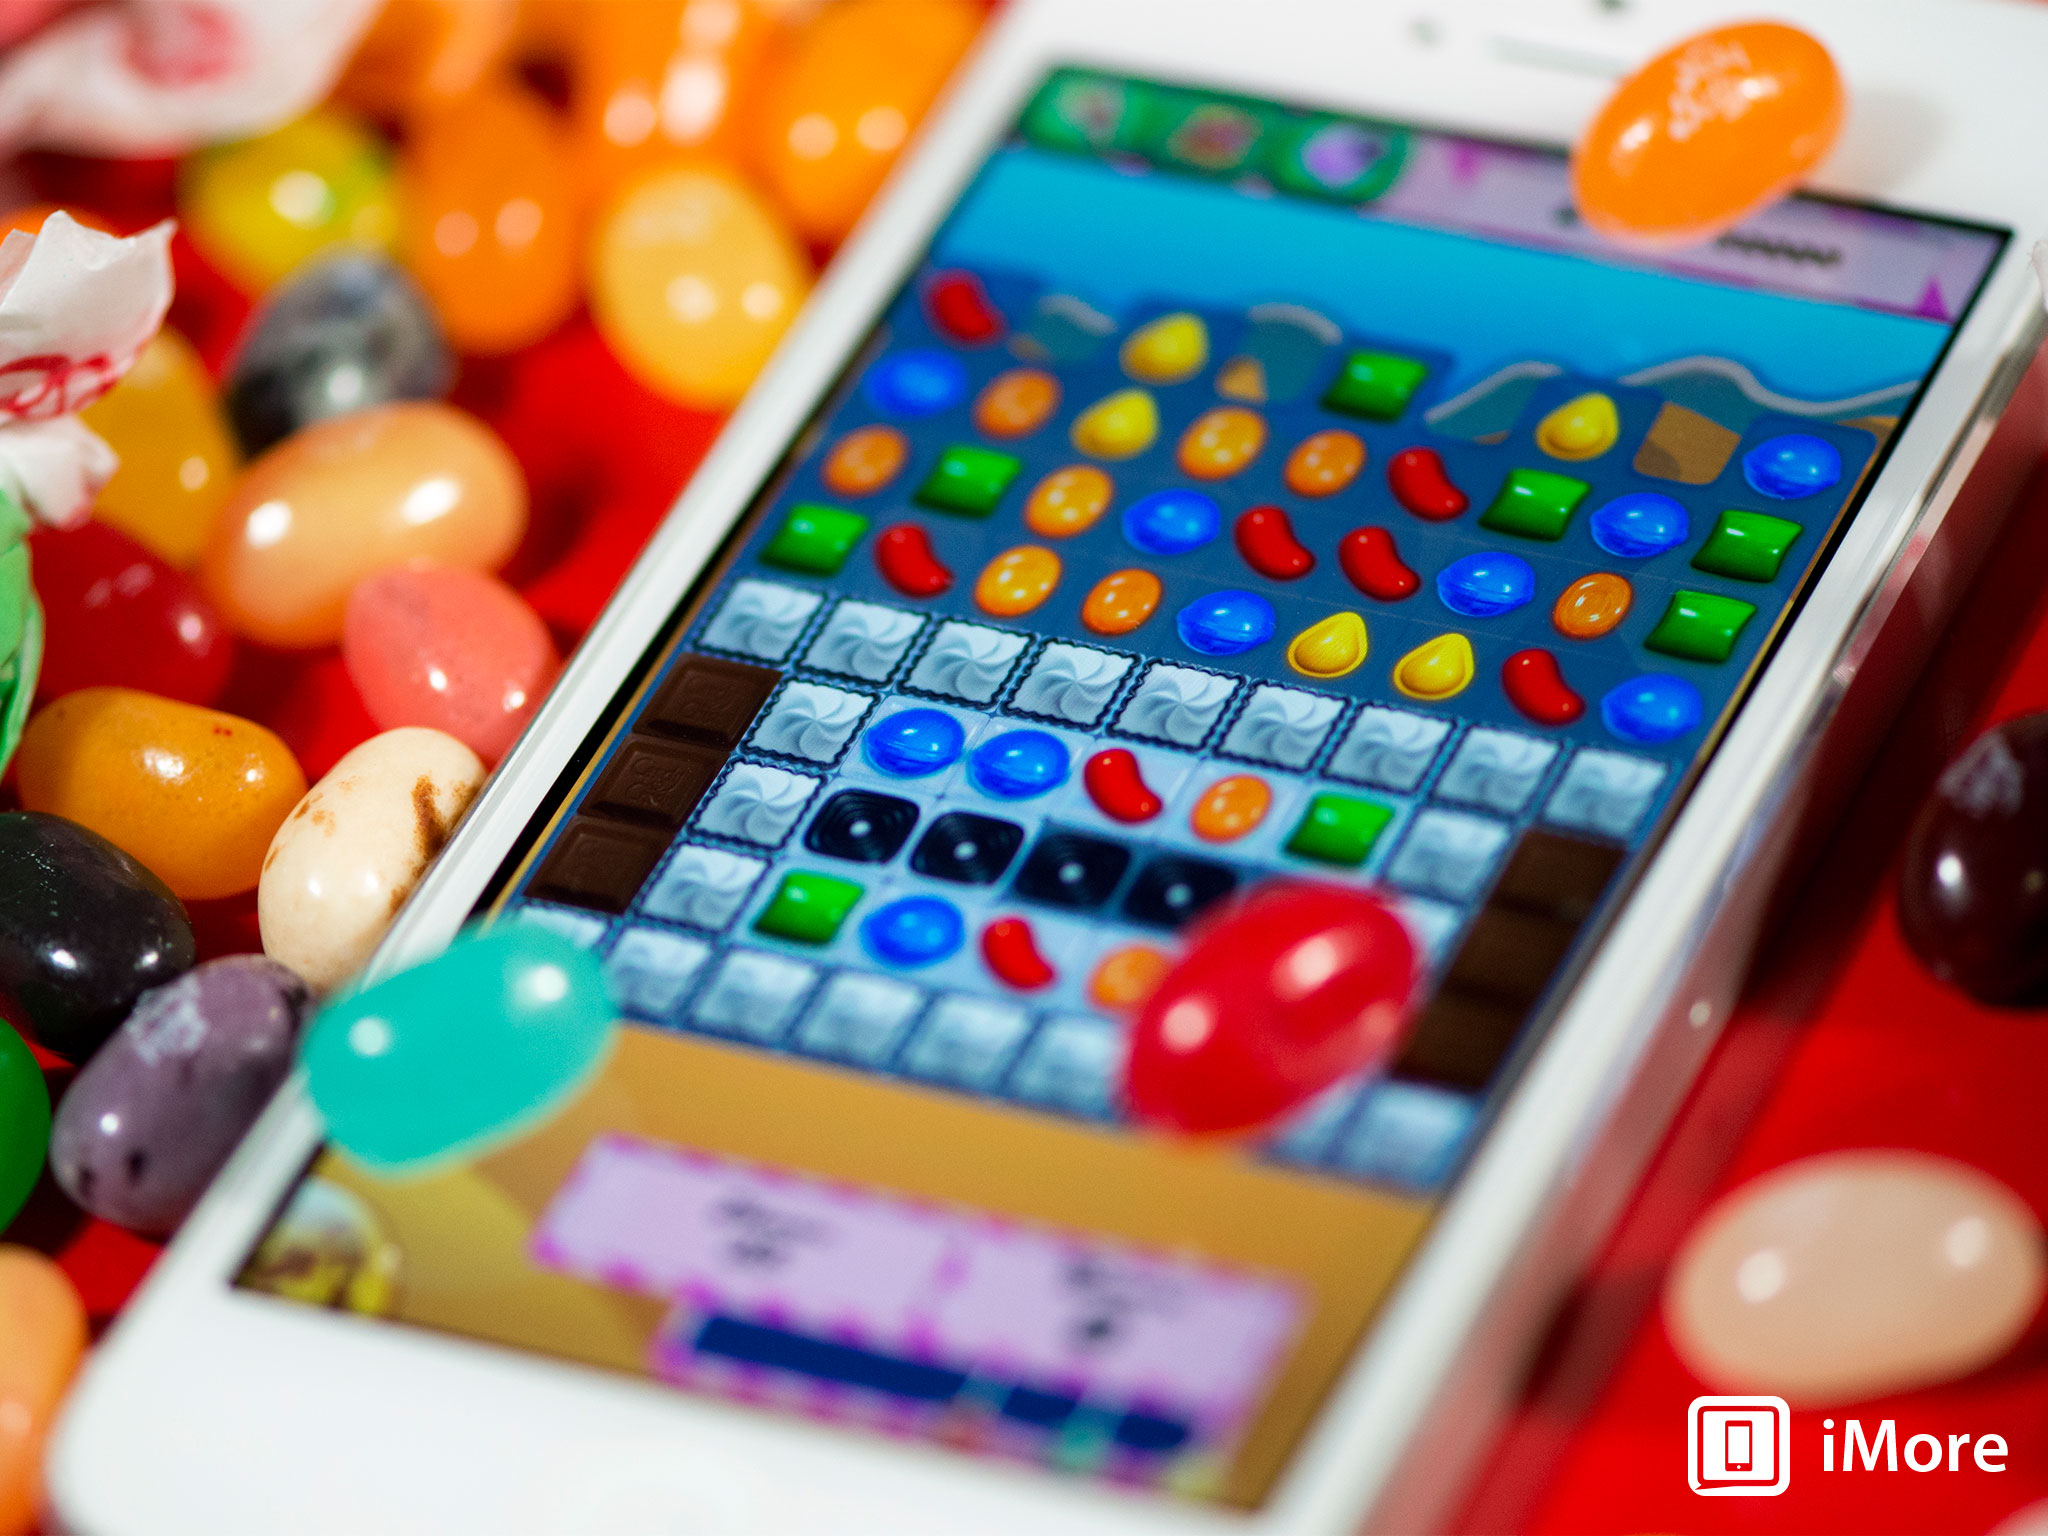 Candy Crush Saga: Another 10 killer help, hints, and guide to extra lives!